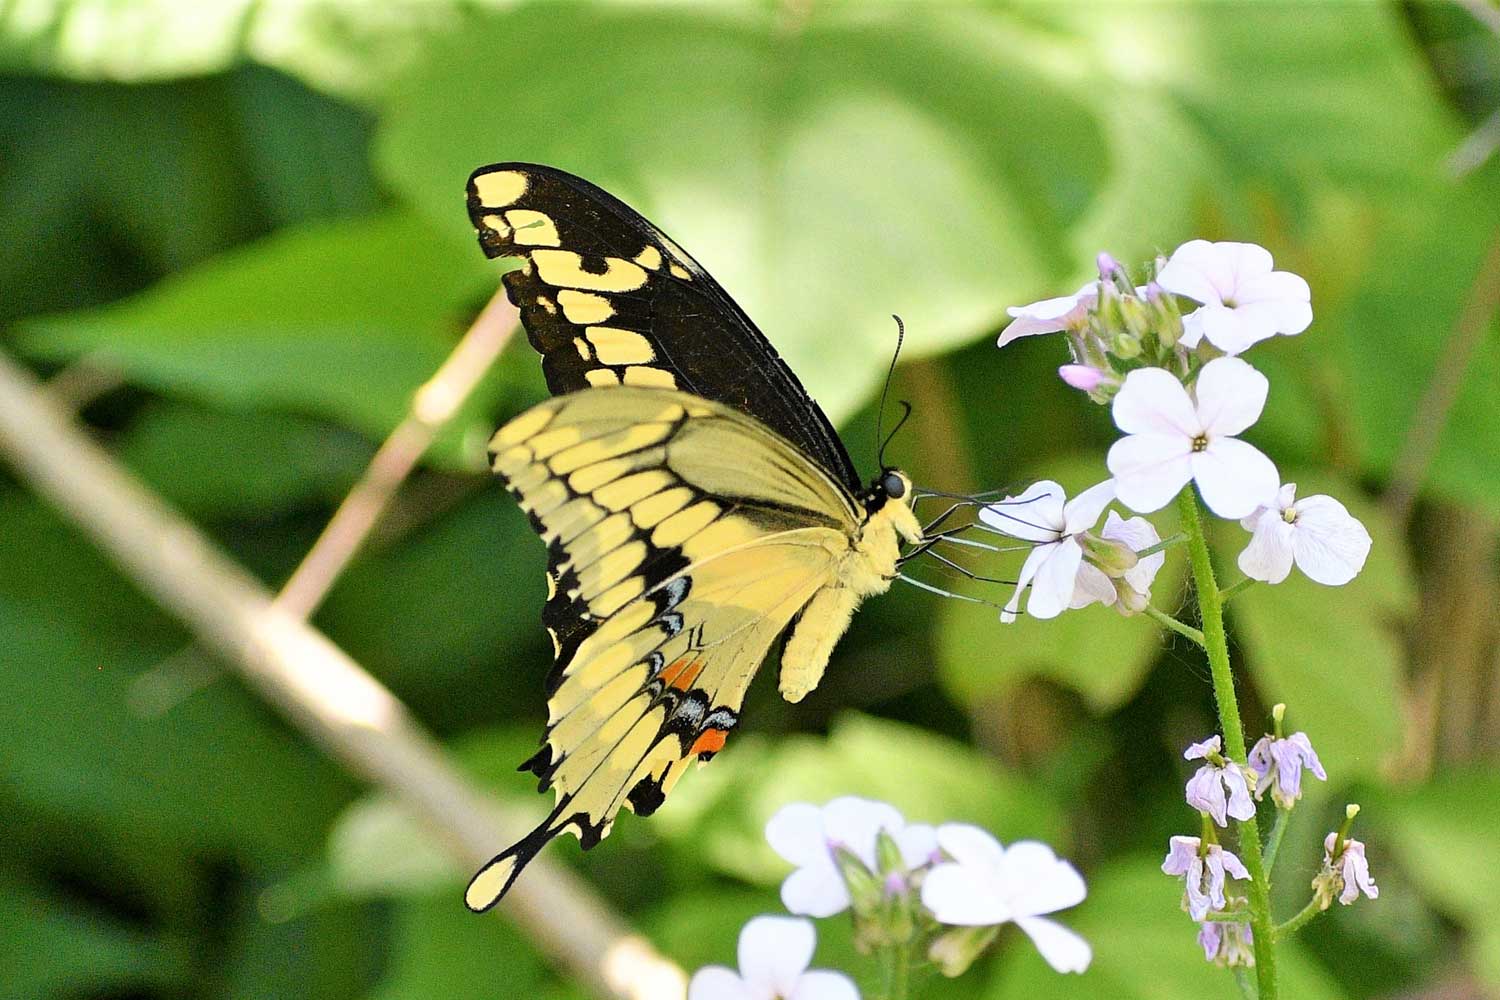 Eastern giant swallowtail butterfly perched on flower booms.